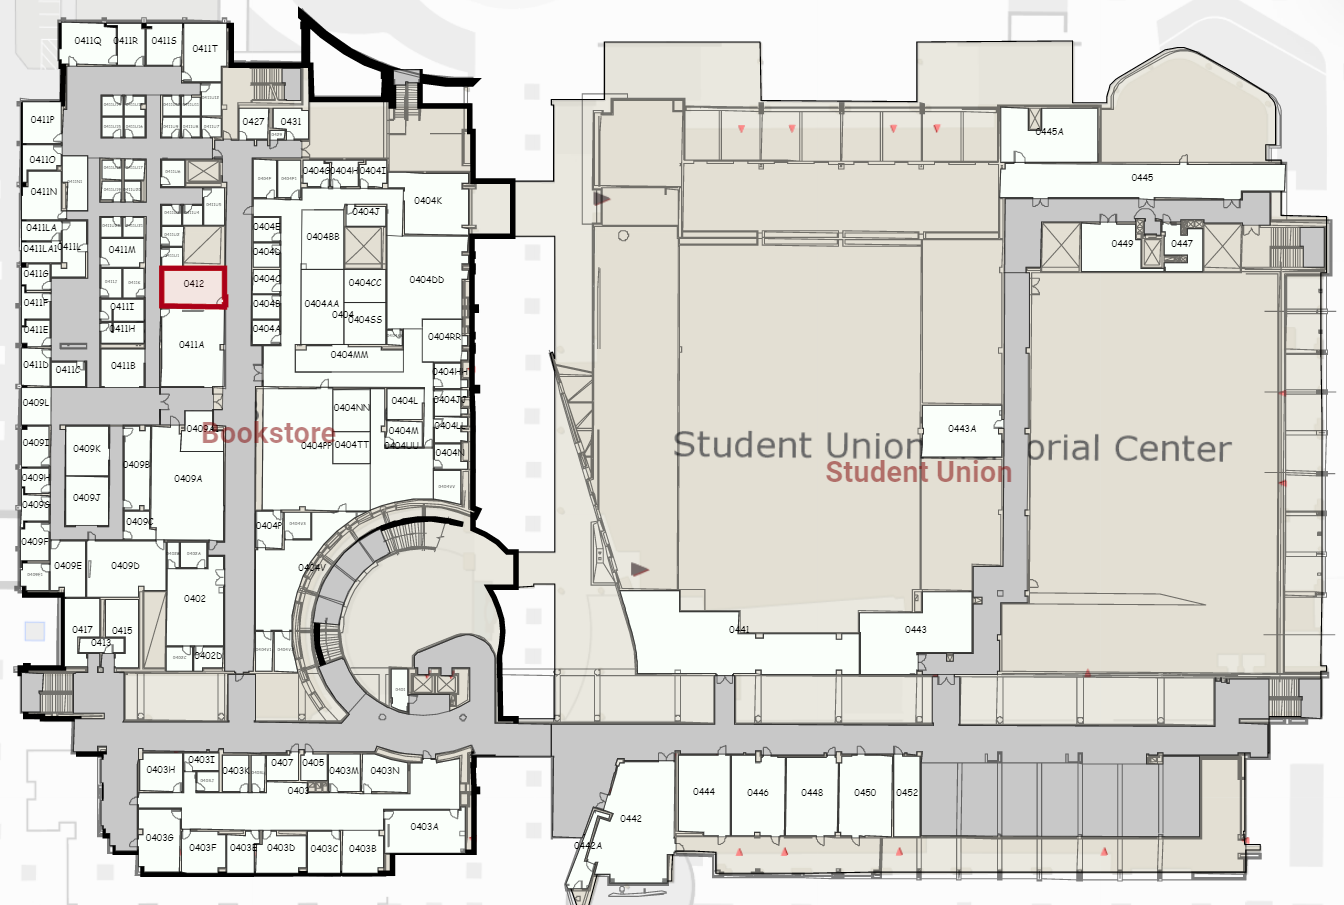 Map of student union. Room 412 highlighted